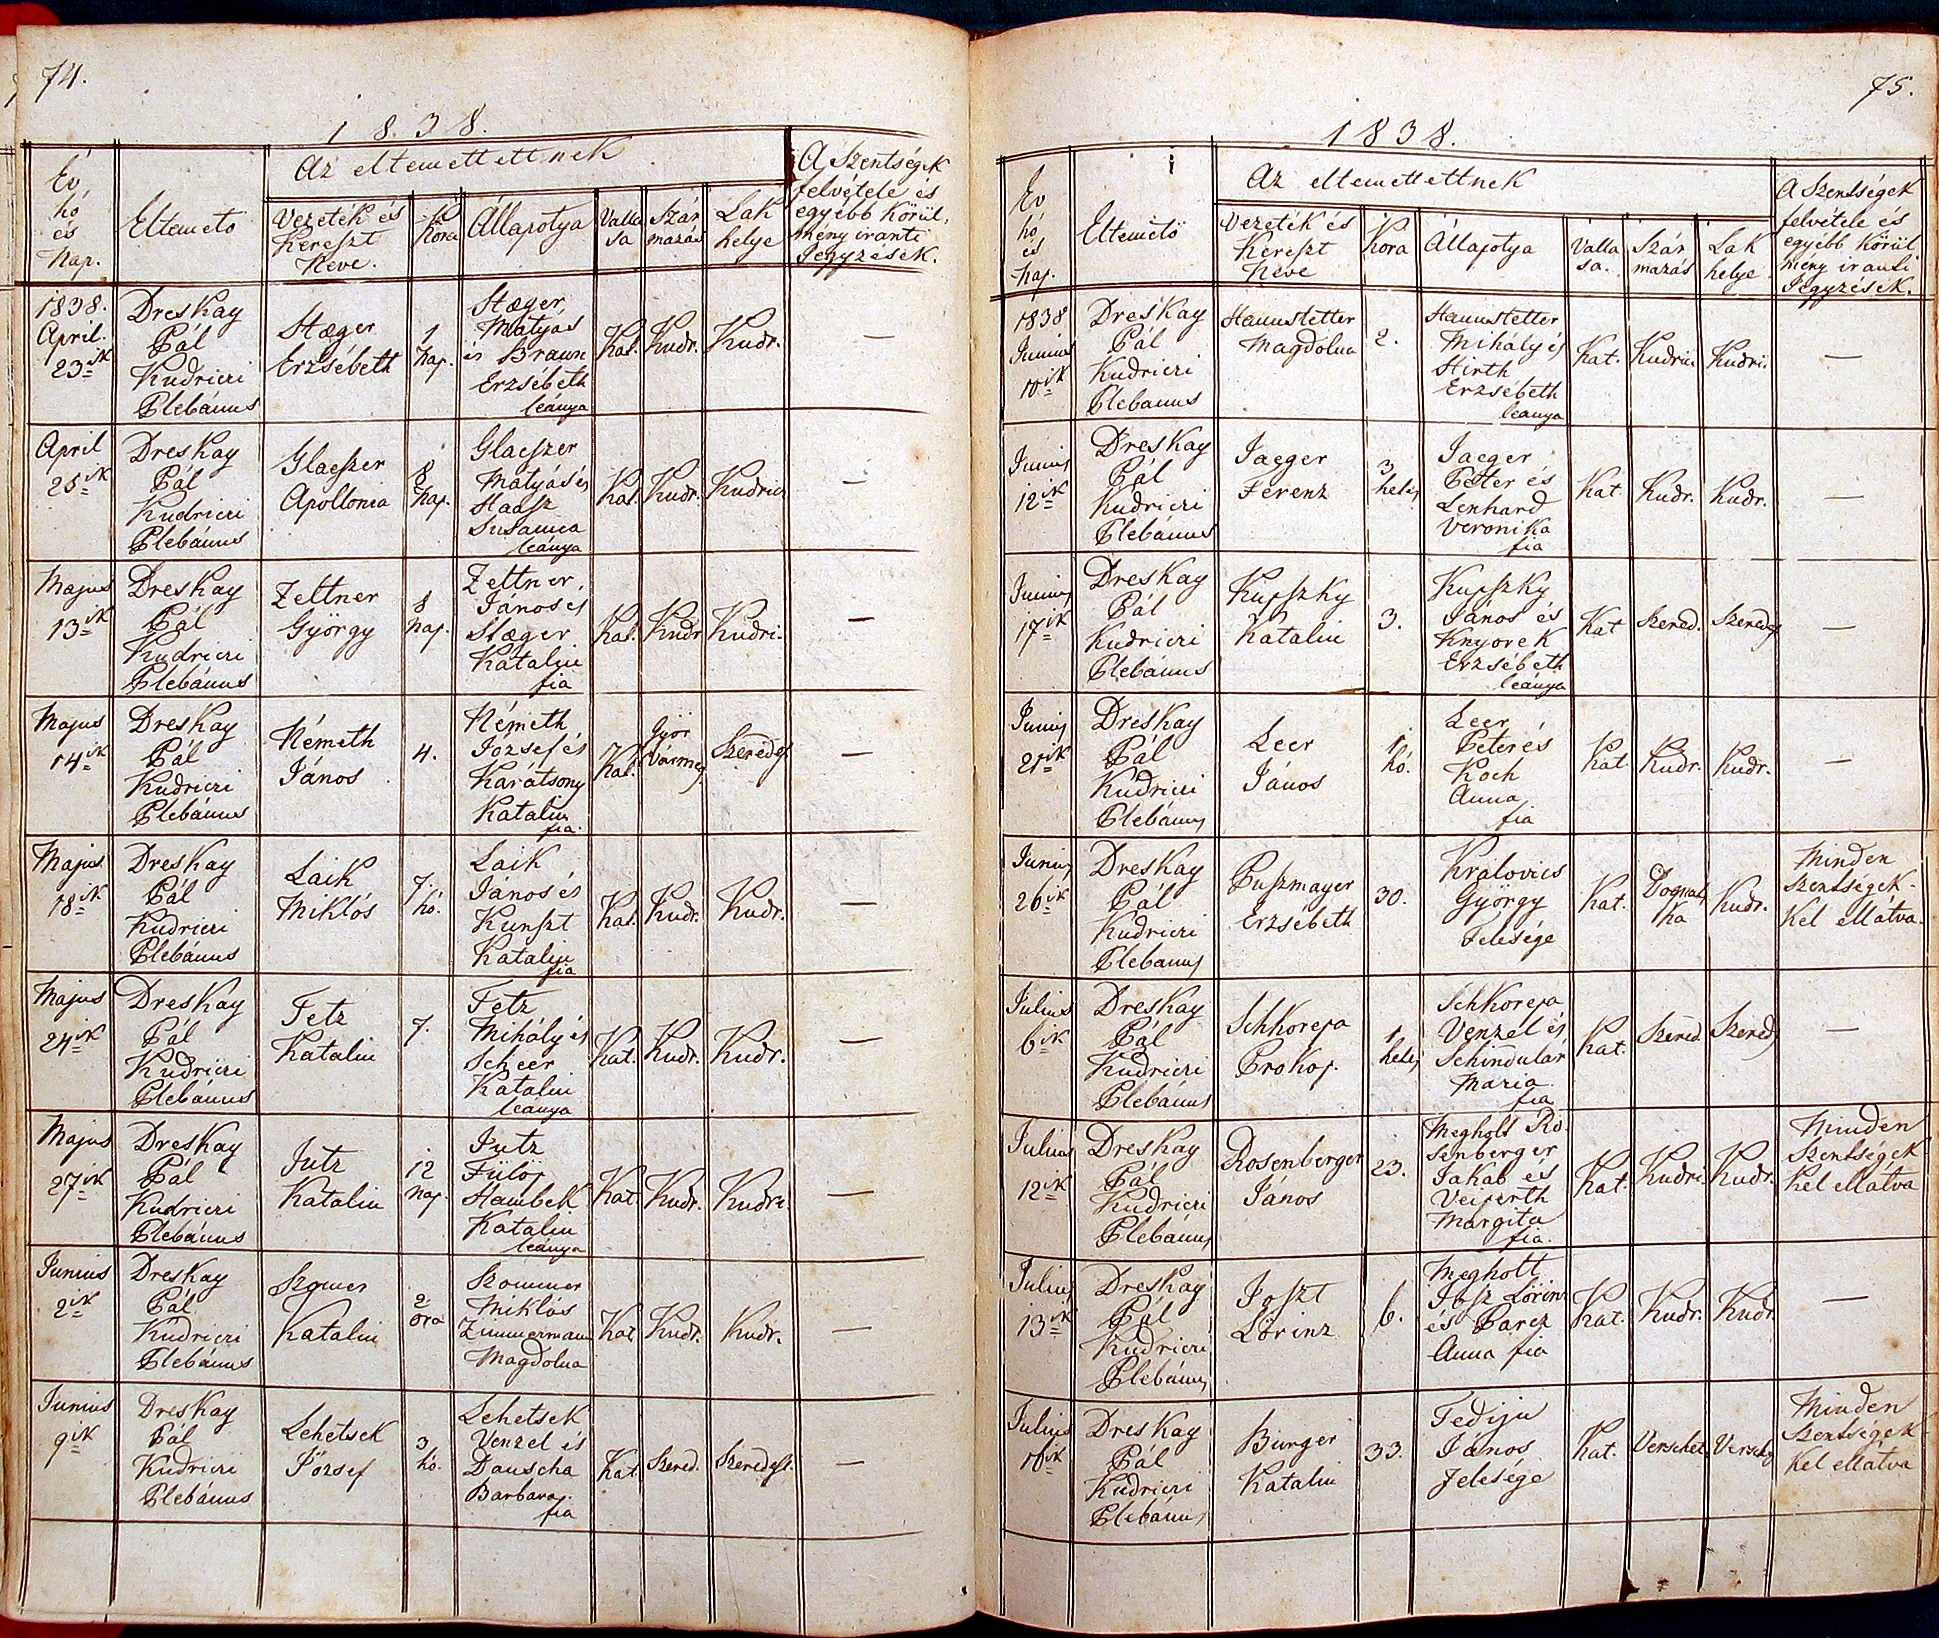 images/church_records/DEATHS/1775-1828D/074 i 075